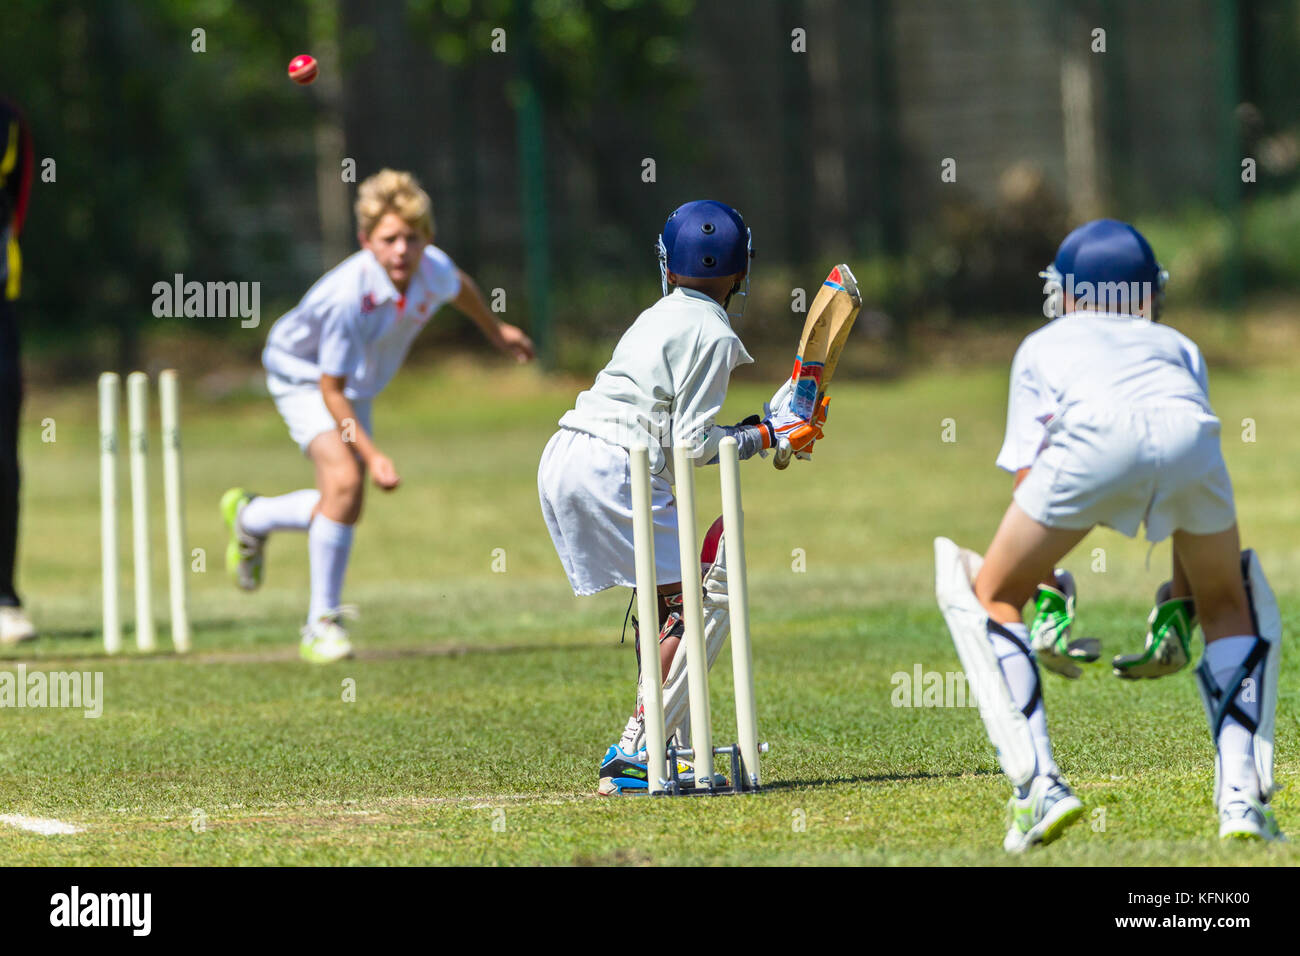 Cricket game juniors players bowler Batsman wicket keeper unidentified action abstract. Stock Photo